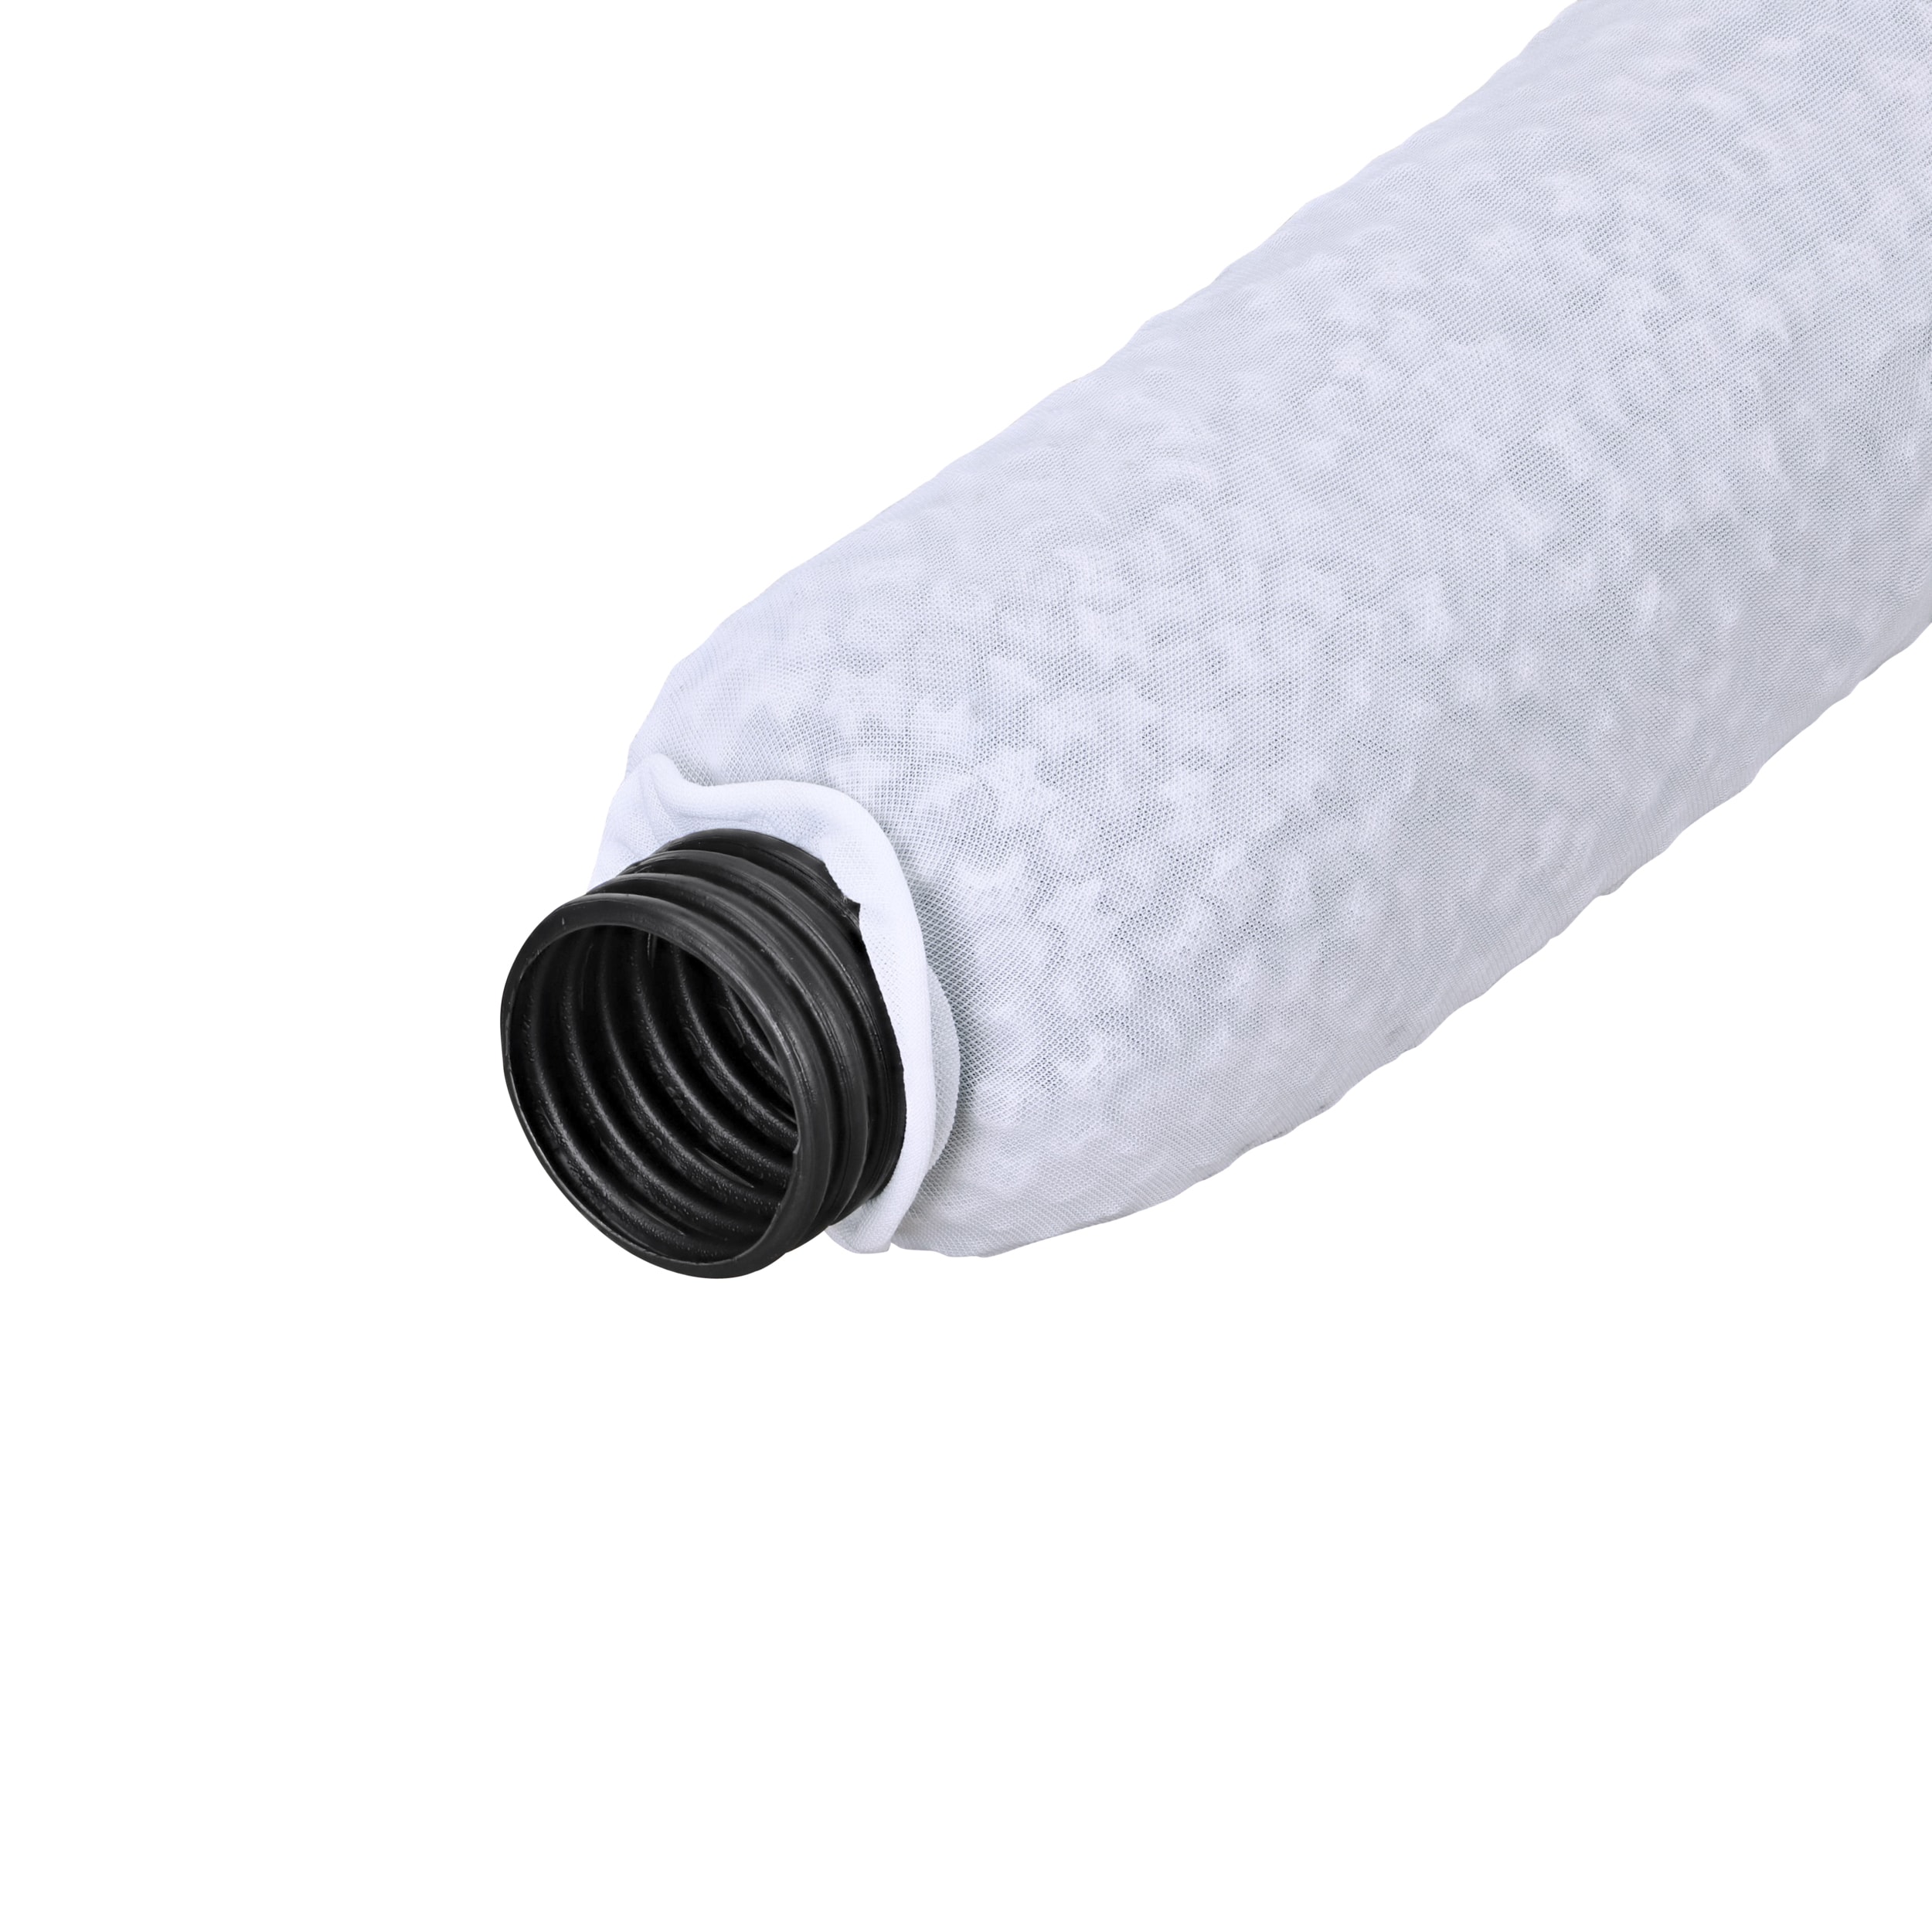 NDS 3-in x 10-ft Corrugated French Drain Pipe in the Corrugated ...